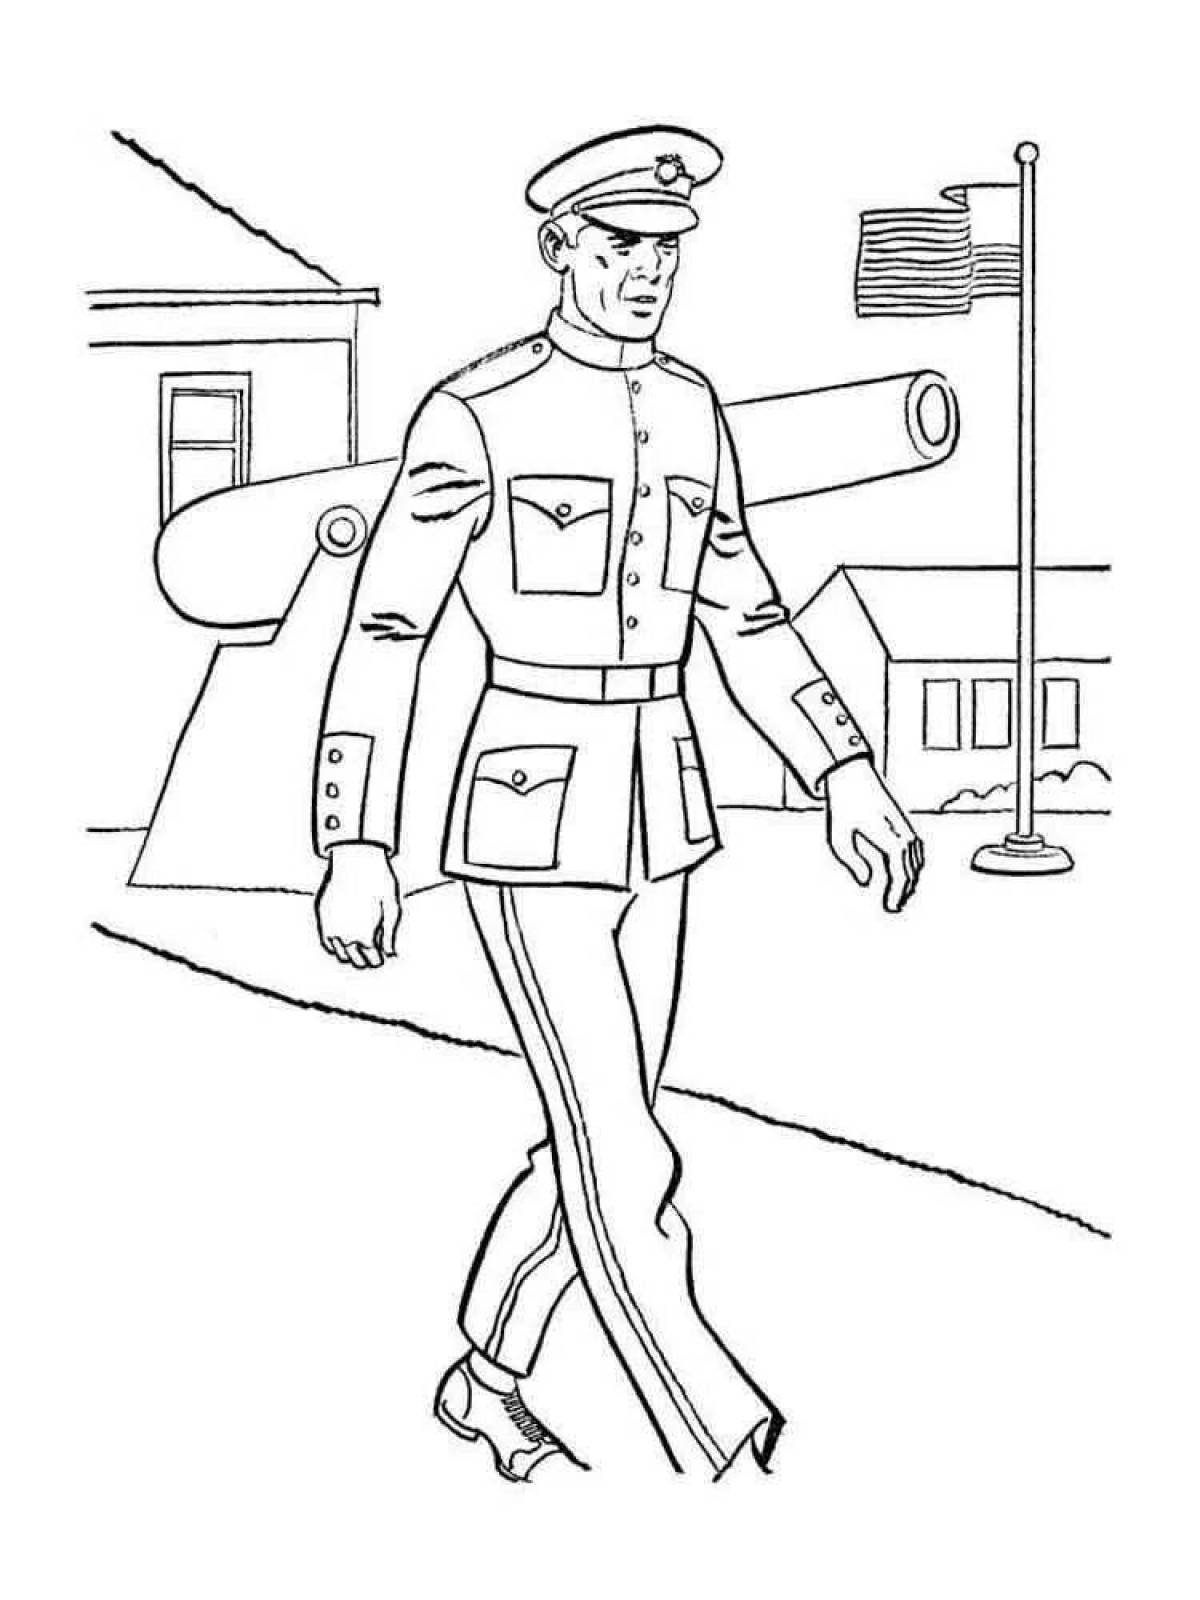 Splendid defenders of the fatherland coloring page